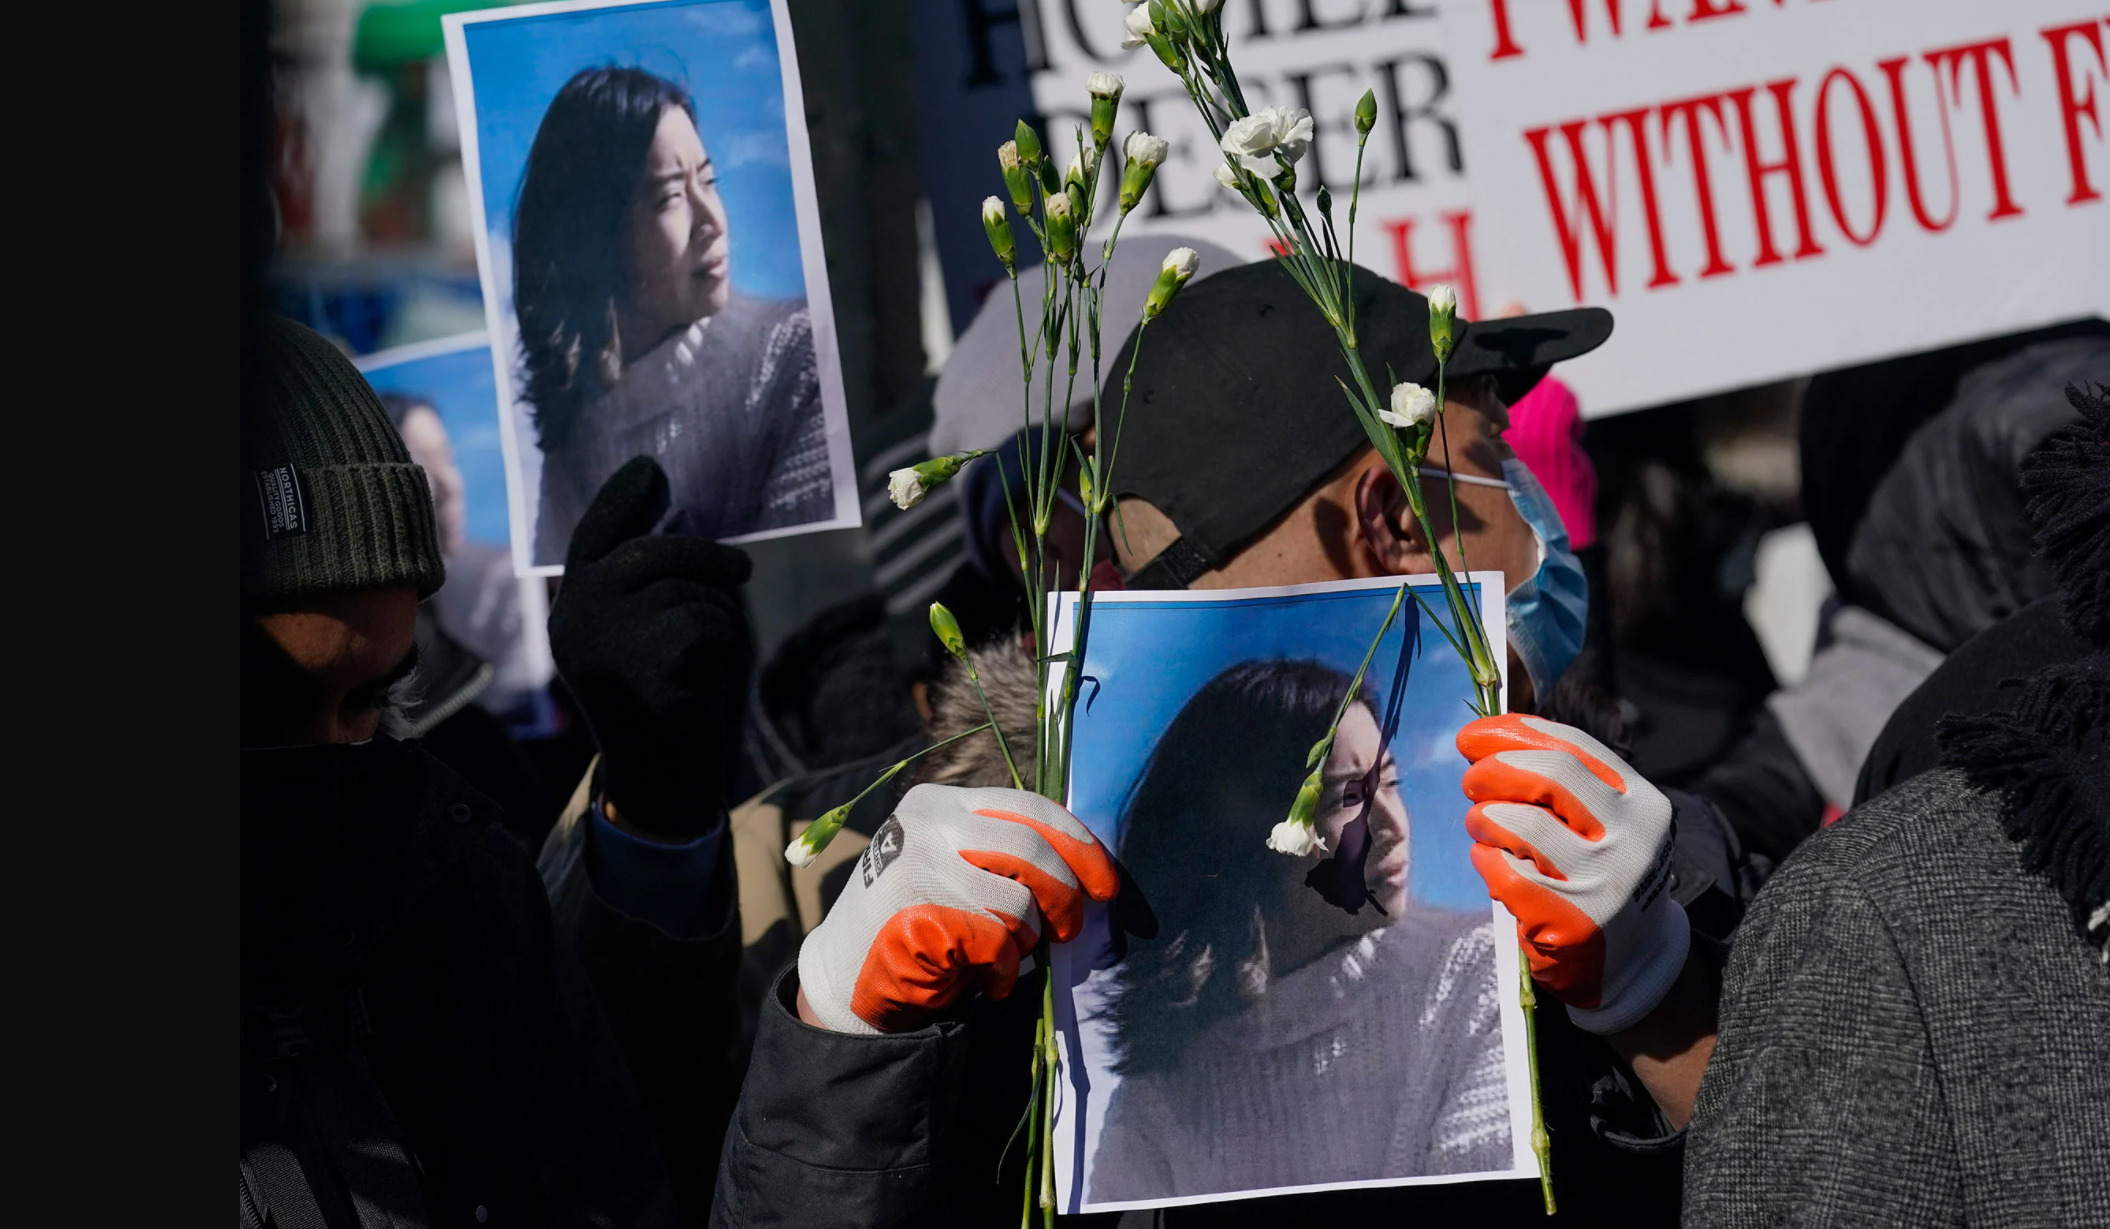 A protestor in a black hat and gloves holds up a photo of Christina Yuna Lee who was murdered in her apartment in New York City. Flowers are affixed to the photo. Other photos and protest signs can be seen in the background. Photo credit: Seth Wenig, Associated Press.